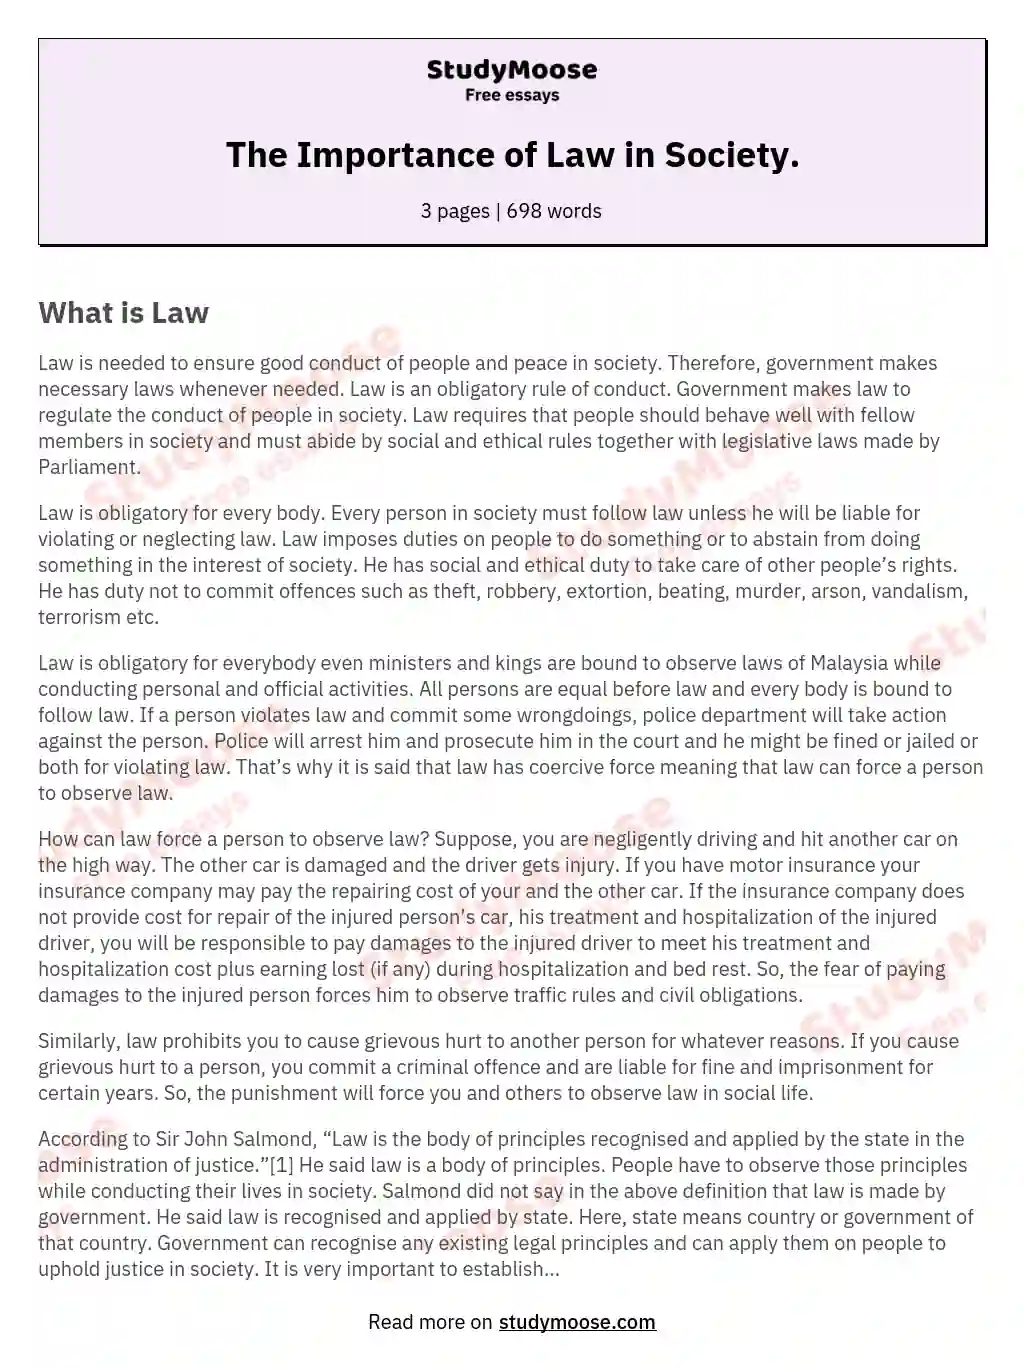 The Importance of Law in Society. essay